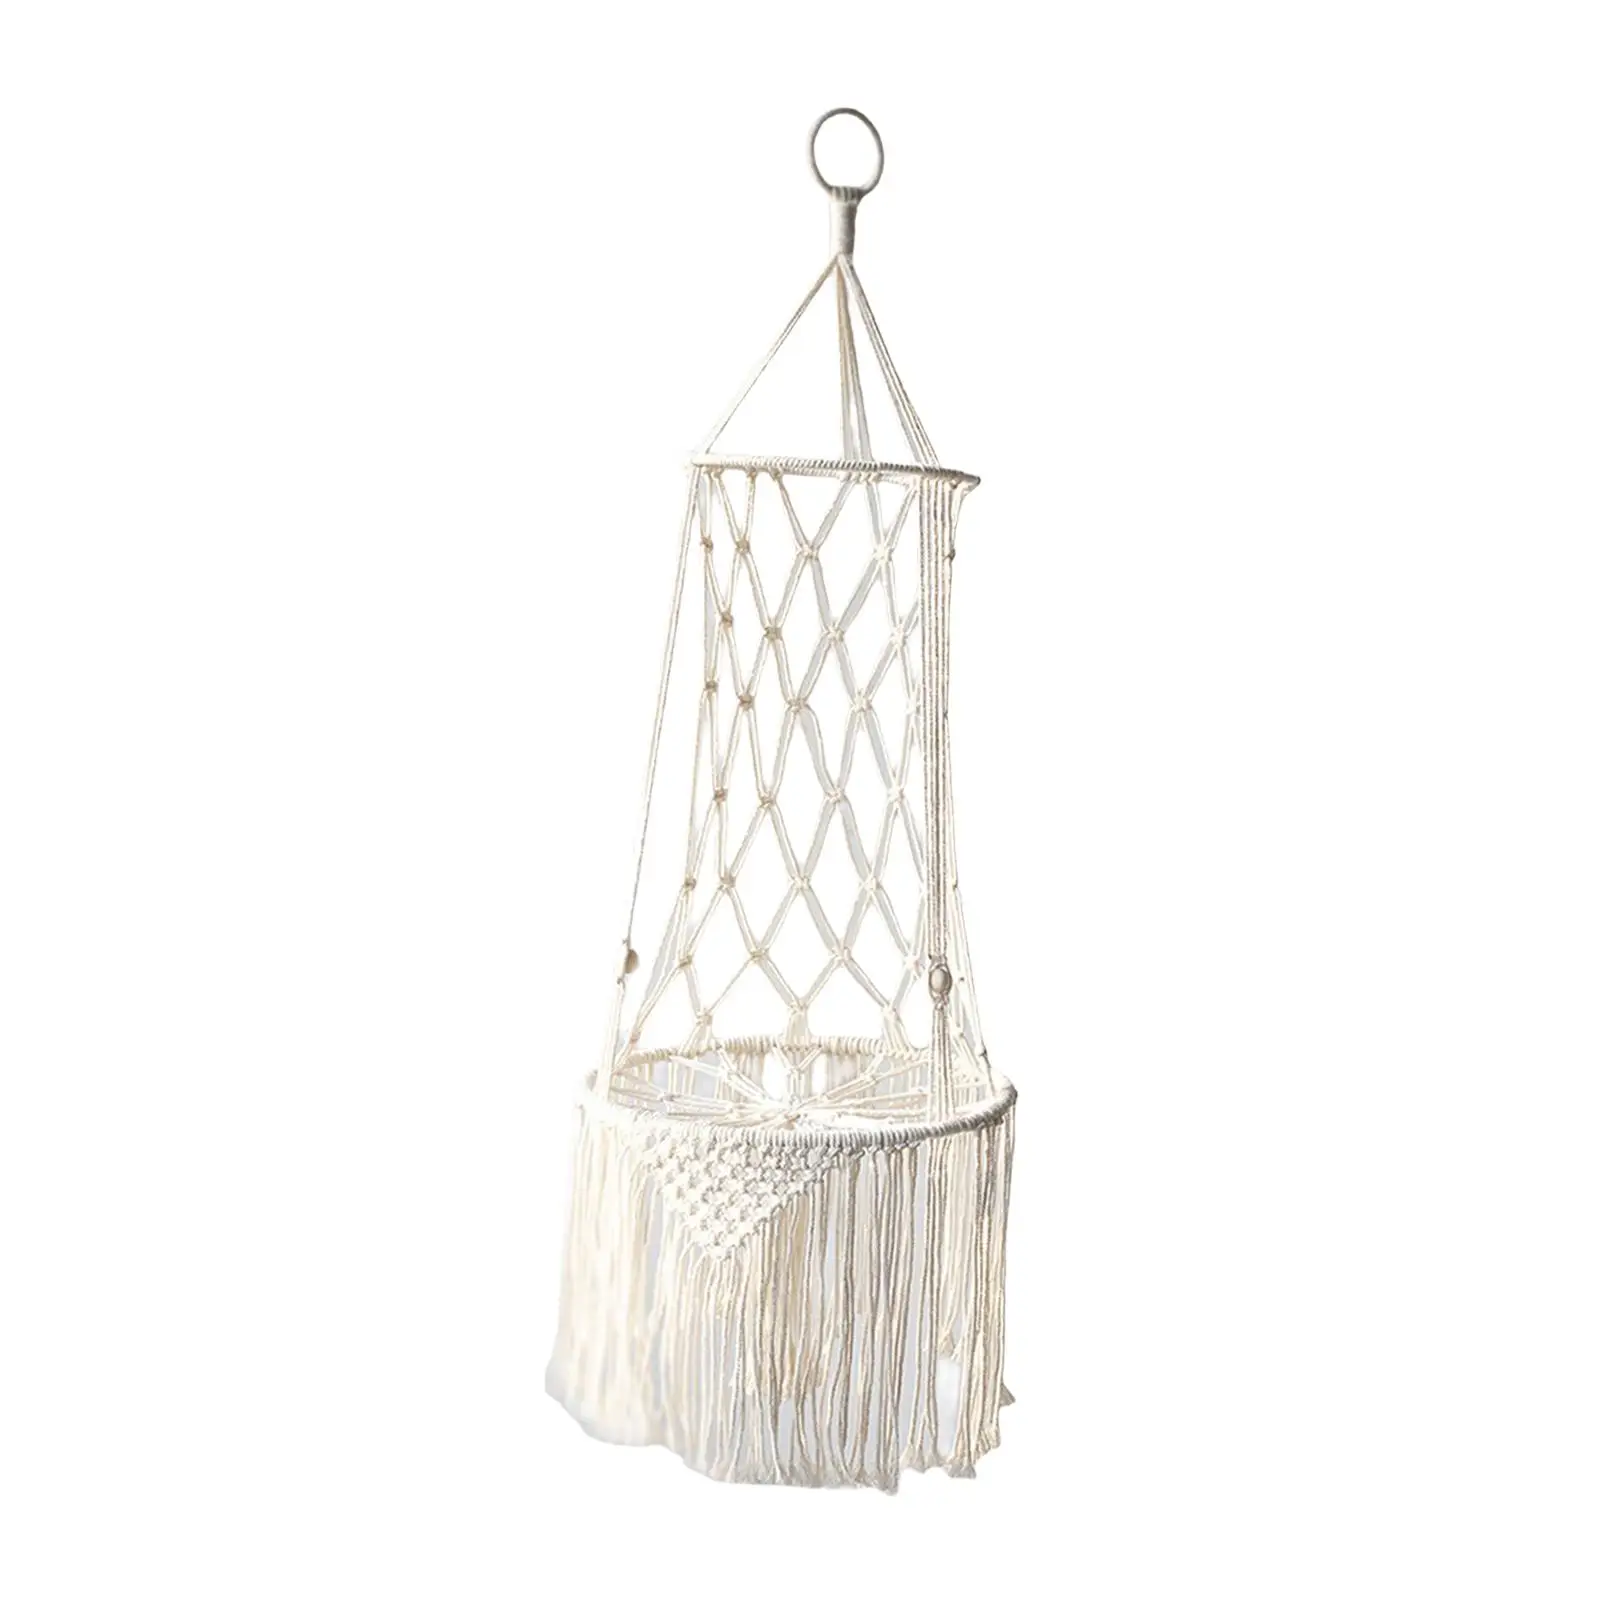 Macrame Cat Hammock Decoration Cotton Rope Gifts Tassel Boho Tapestry Hand Woven Beige Hanging Cat Cage House Nest for Wall